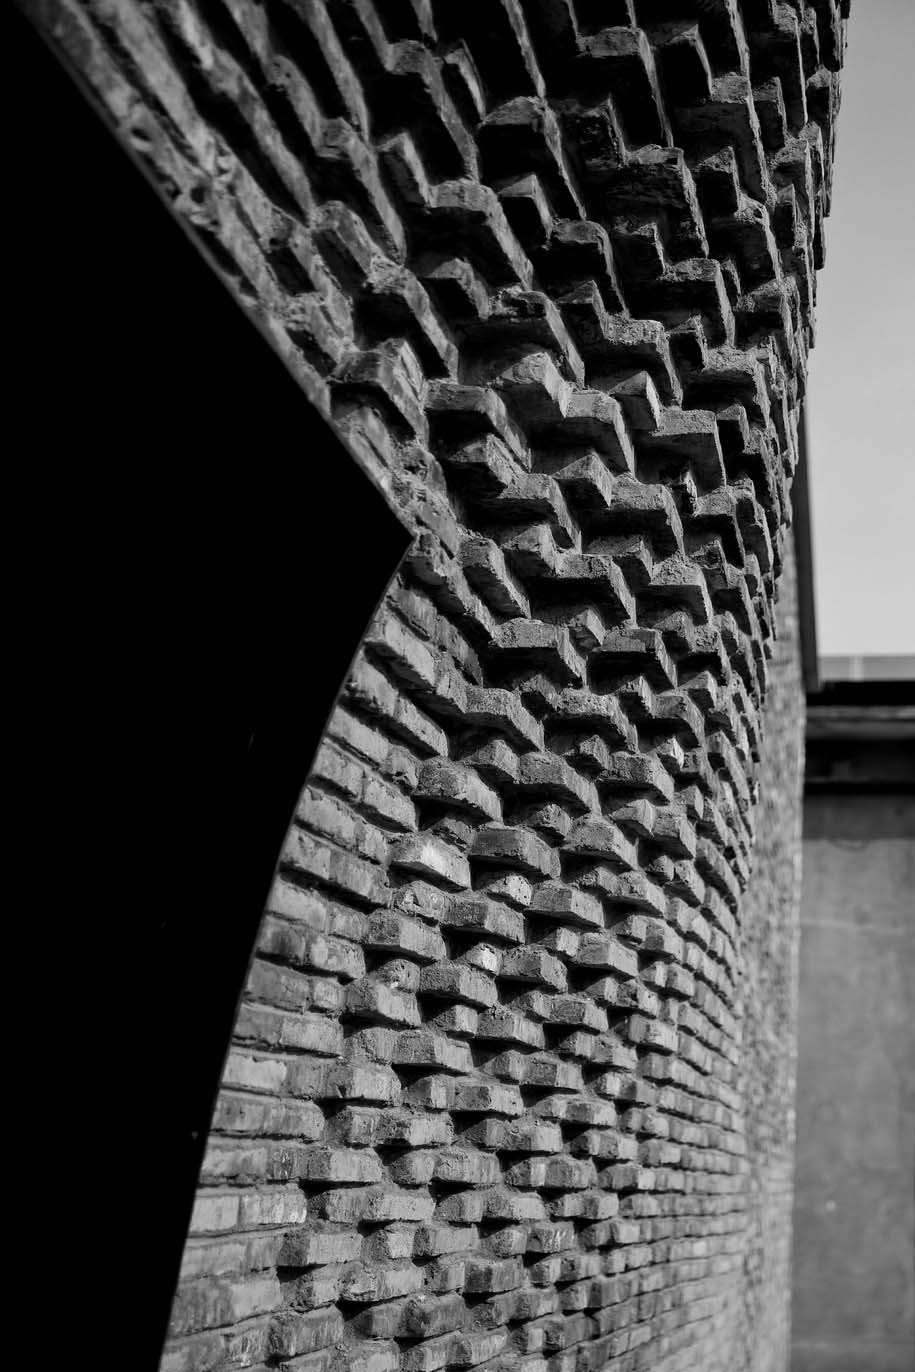 Archisearch Archi-Union Architects design Chi She bulging facade from recycled bricks